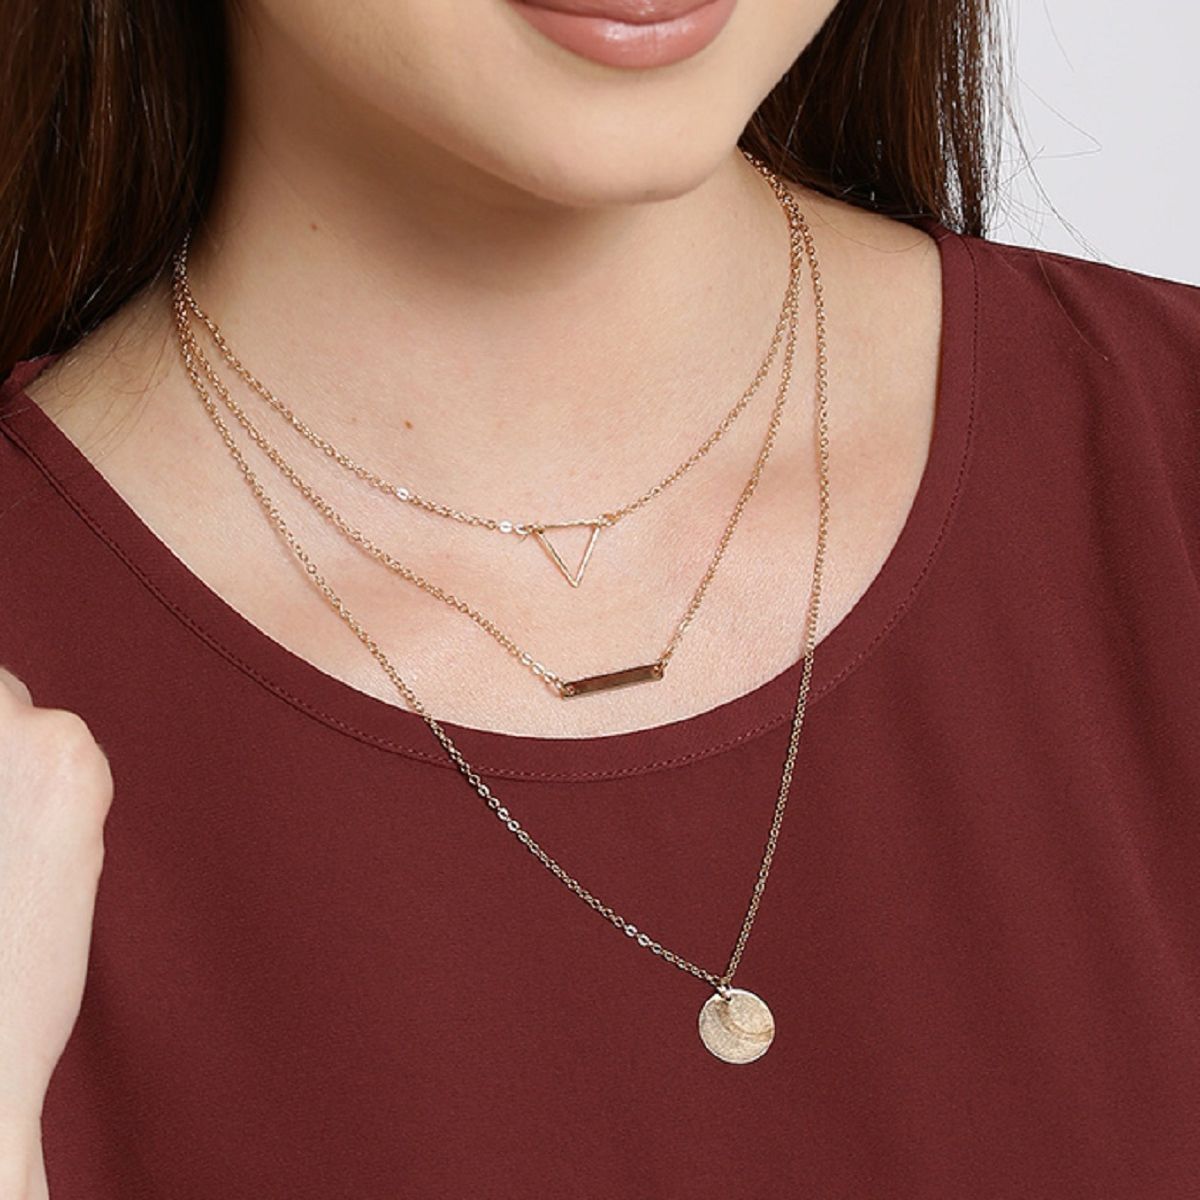 Fabula Jewellery Gold Tone Delicate Snake Chain Fashion Necklace for Women & Girls (Gold) At Nykaa, Best Beauty Products Online